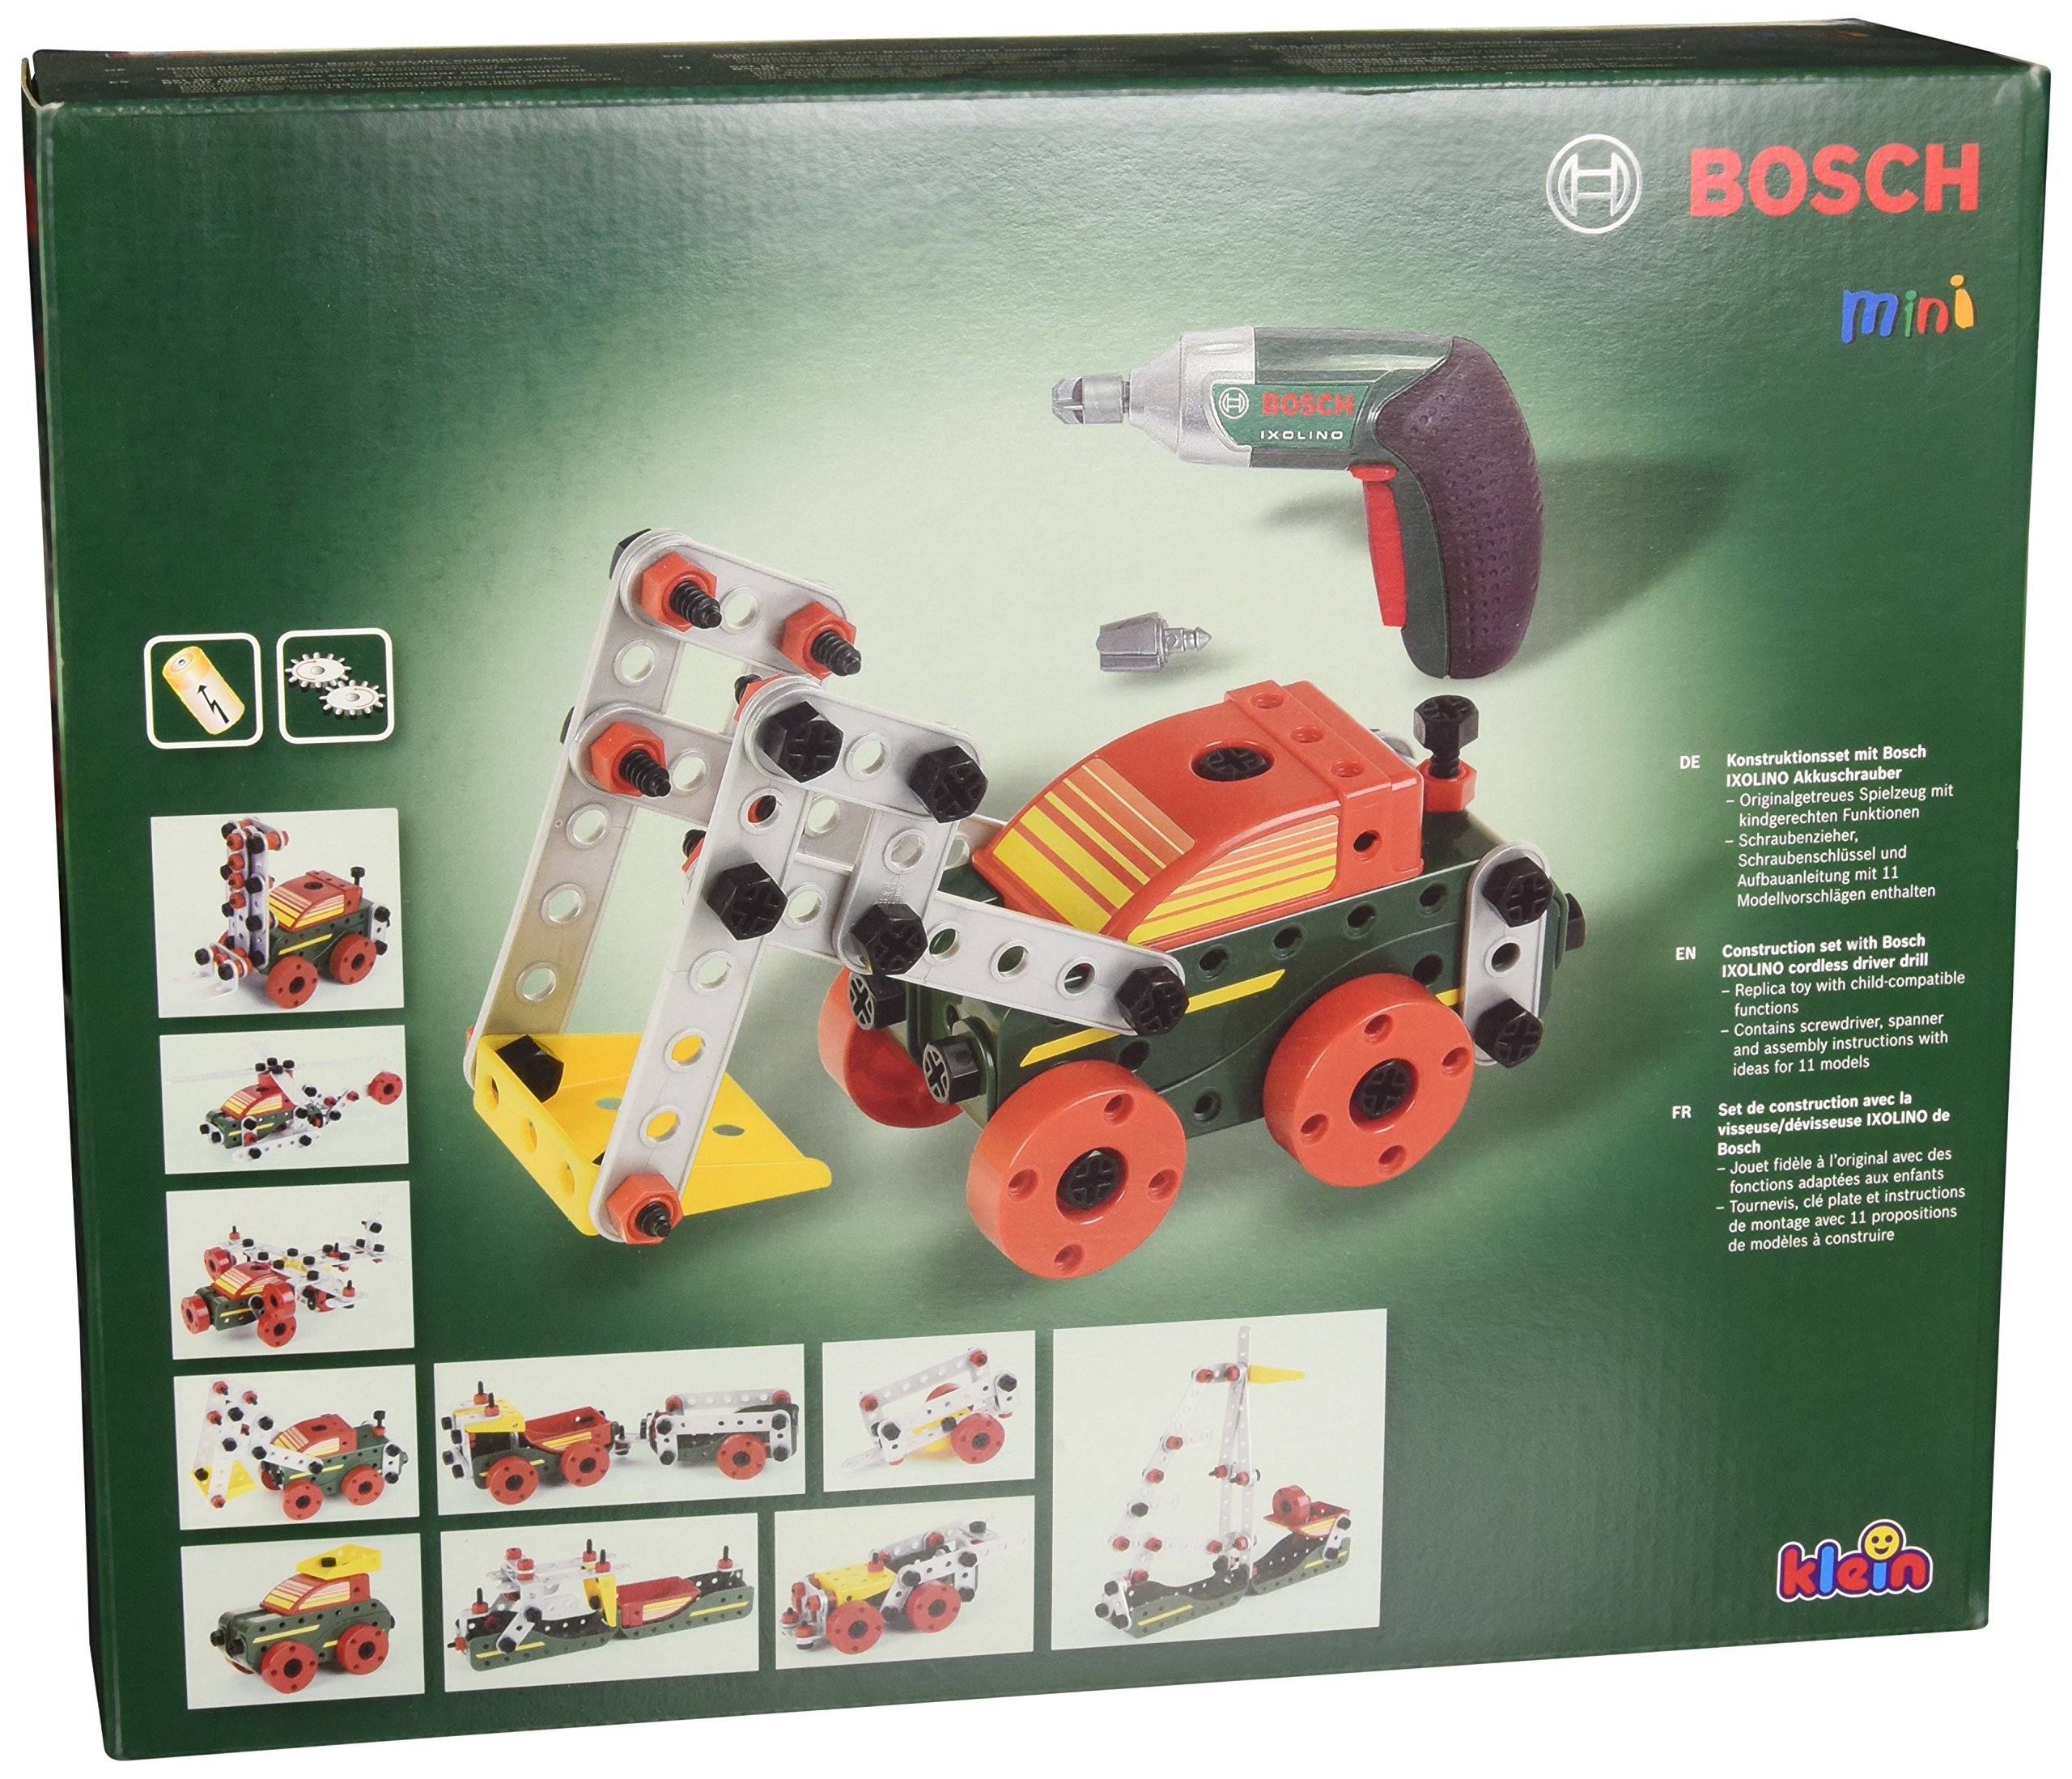 Bosch Theo Klein Multitech Building Kit With Cordless Drill